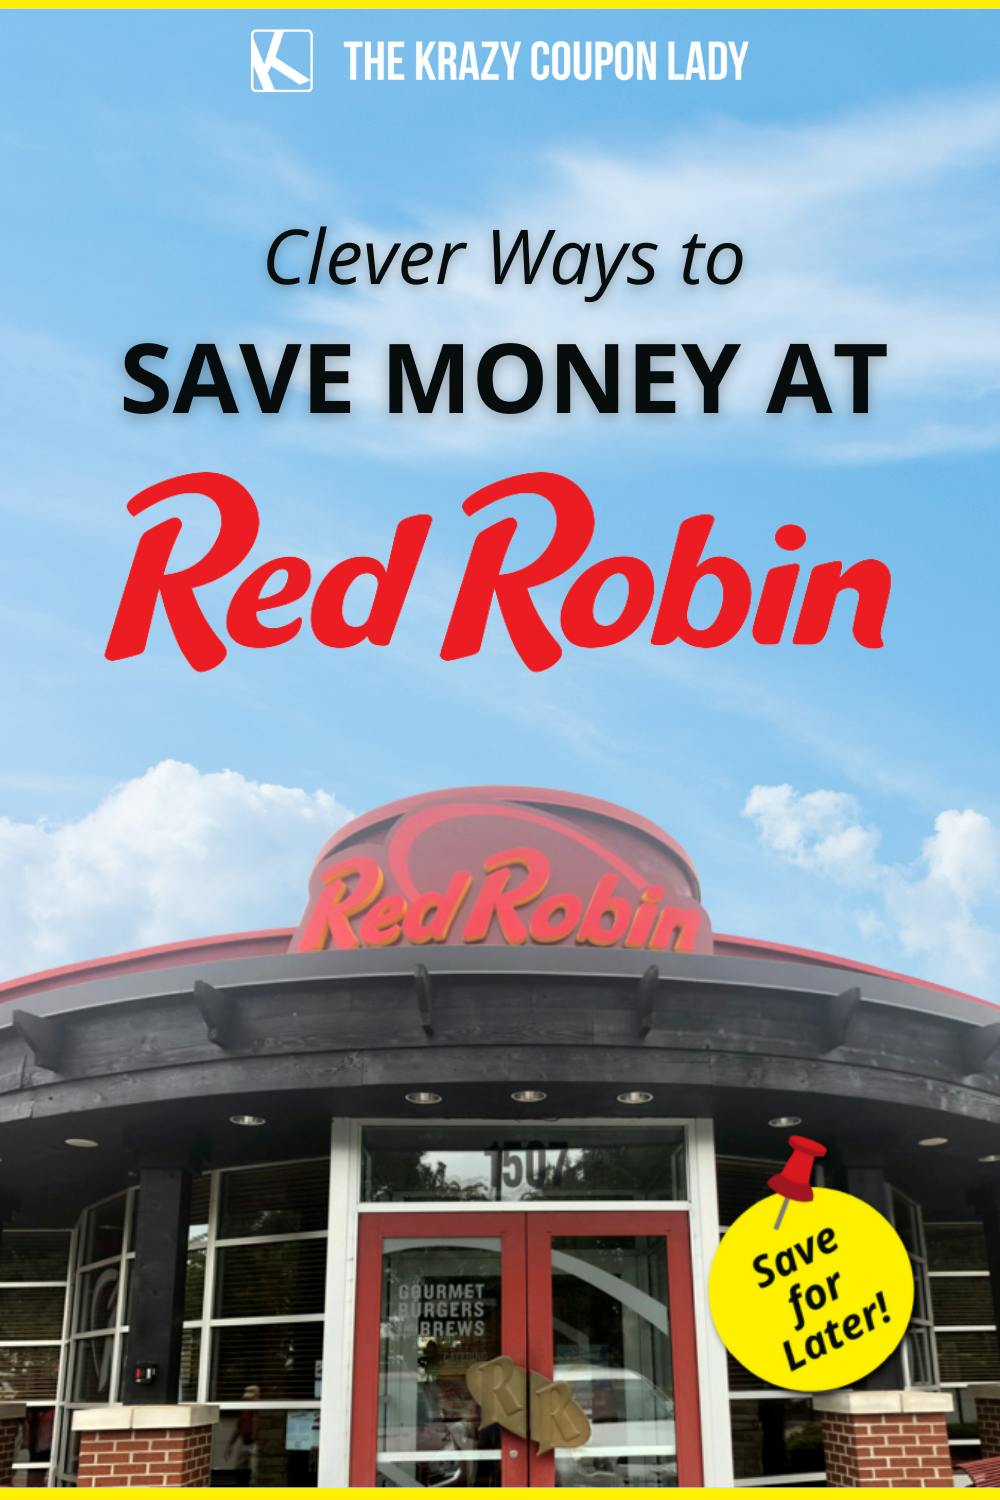 23 Ways to Be Red Robin Royalty While Spending Less